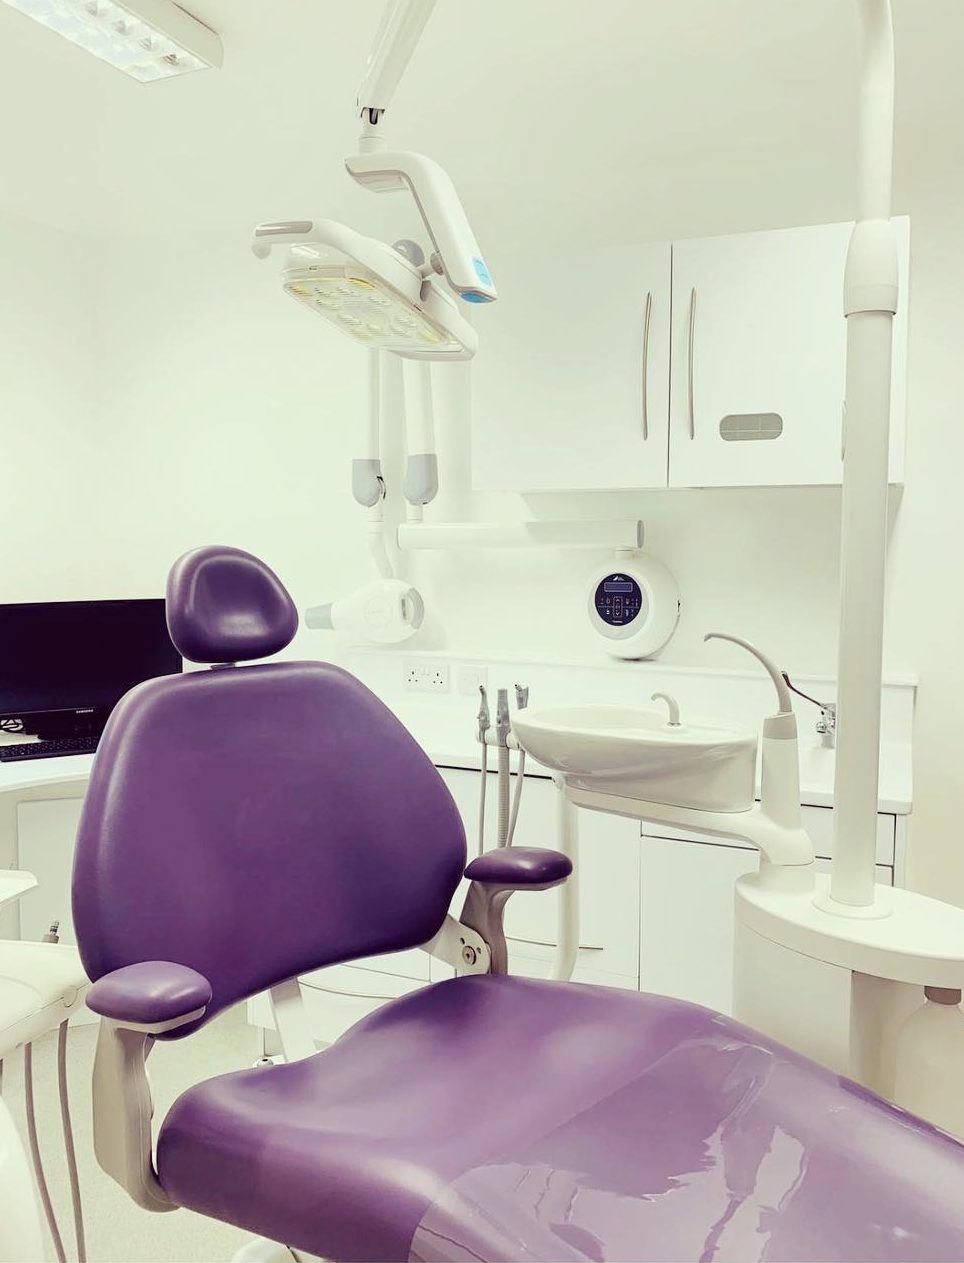 Dental Surgery Design with a new A-dec chair, Durr intraoral x-ray and dental cabinetry